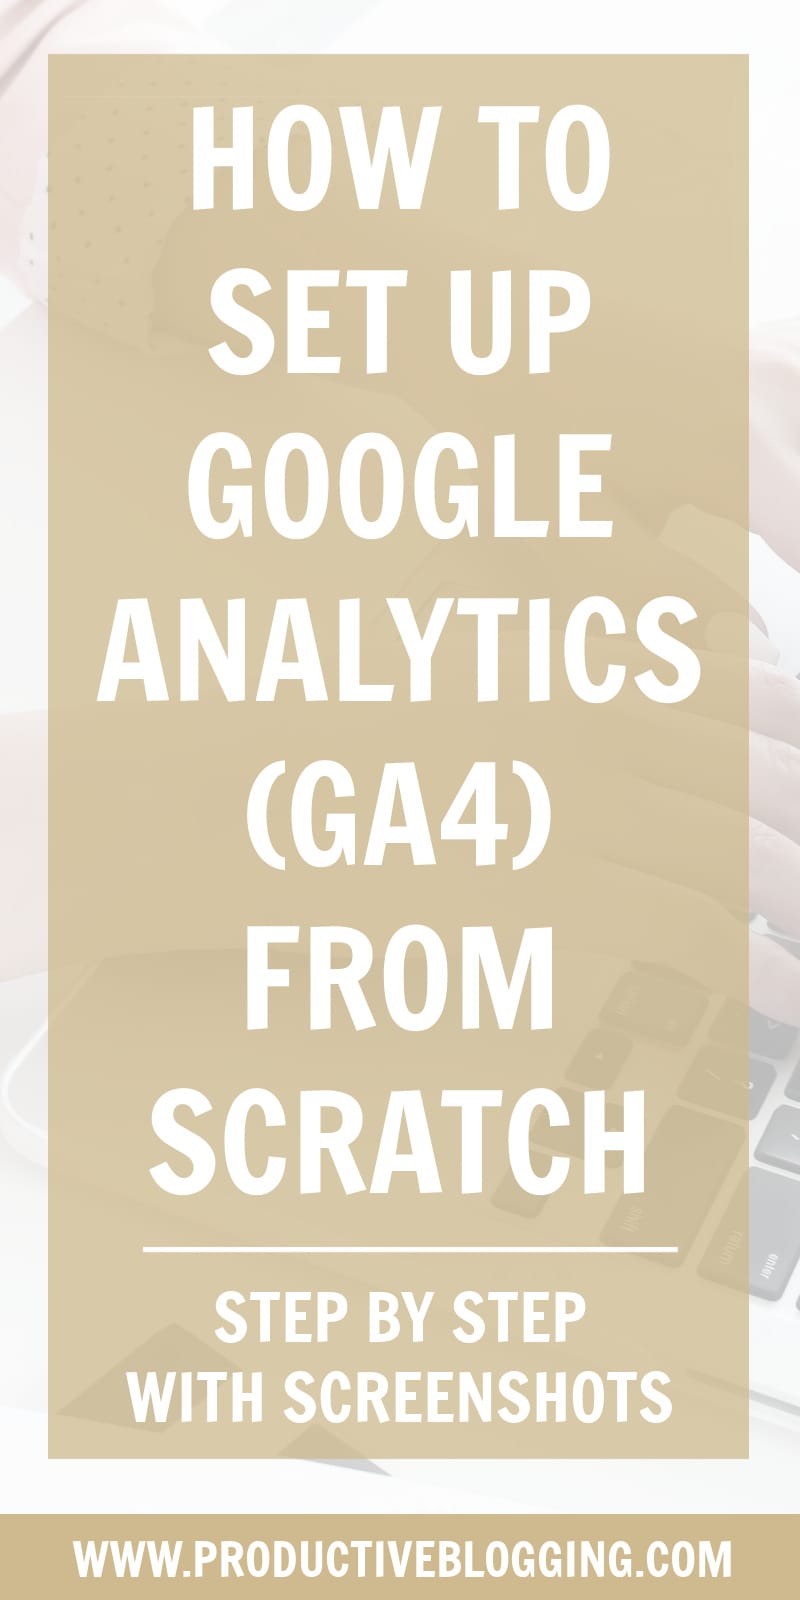 Want to set up Google Analytics for your self hosted WordPress blog, but not sure how? In this tutorial I show you how to set up Google Analytics 4 from scratch. #googleanalytics #googleanalytics4 #newgoogleanalytics #ga4 #bloggingtips #SEO #SEOtips #SEOhacks #searchengineoptimization #SEOforbloggers #blogSEO #growyourblog #bloggrowth #bloggingtips #blogtips #blogging #bloggers #productiveblogging